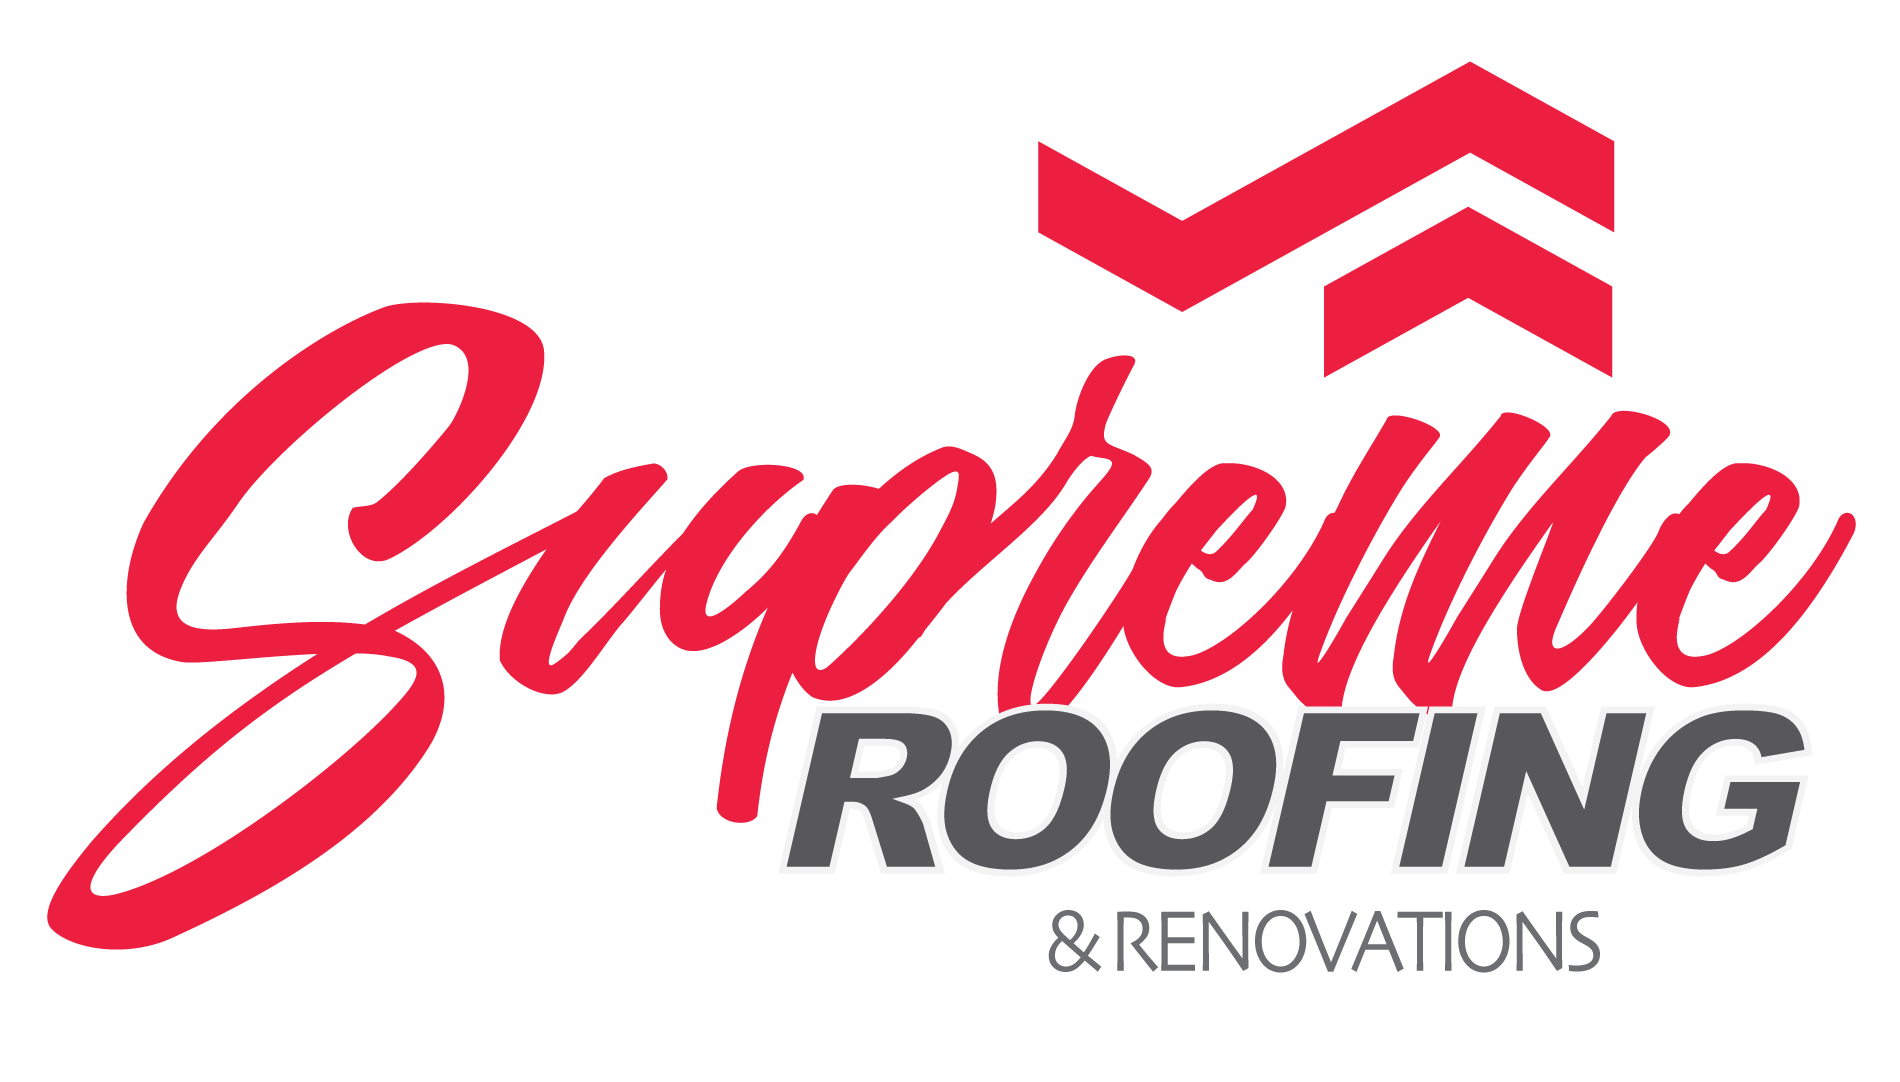 Supreme Roofing & Renovations